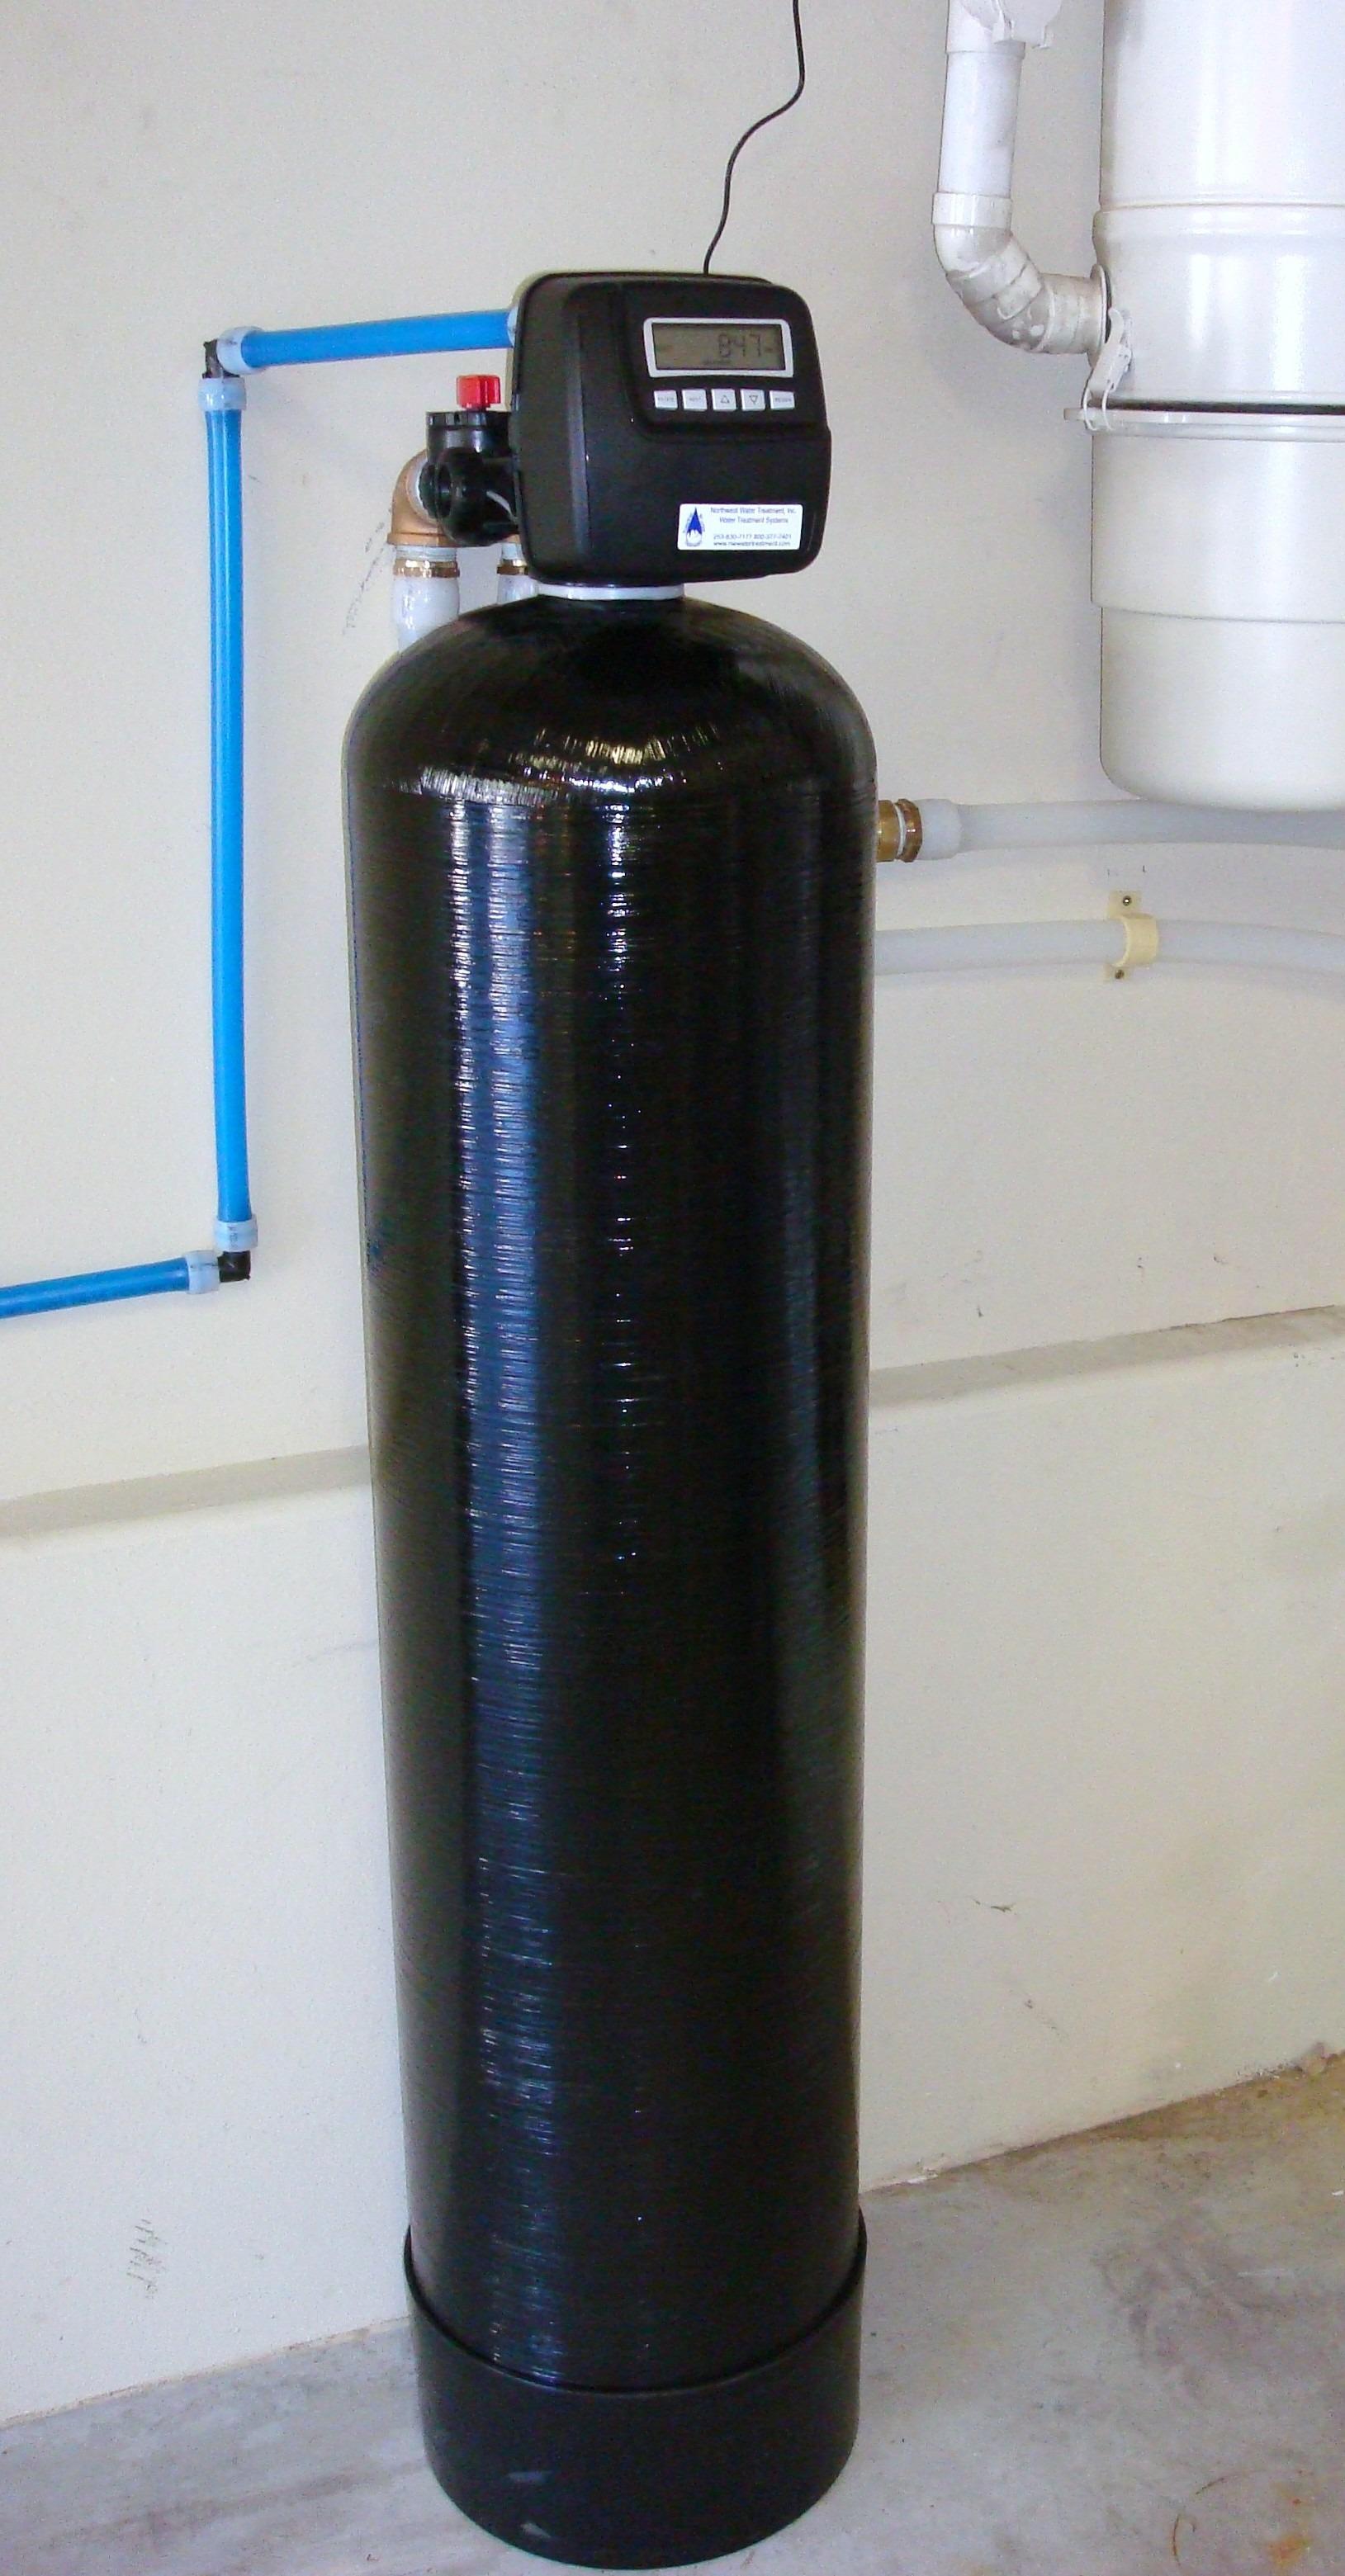 Whole house carbon filter for removing chlorine from all home water - faucets and bathing.